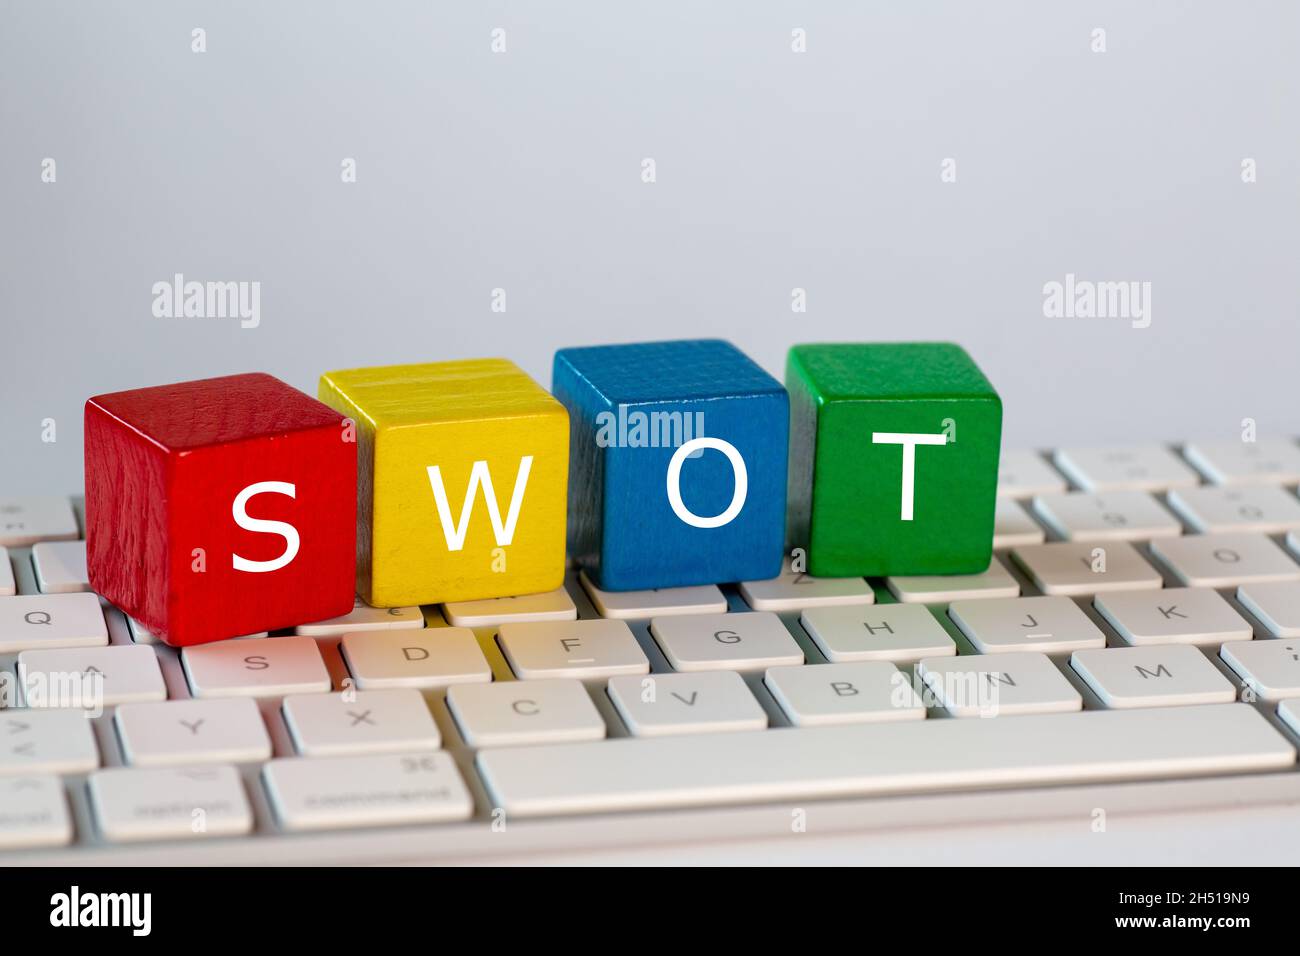 The letters SWOT stand for strengths, weaknesses, opportunities and threats. These letters are written in white on red, yellow, blue and green blocks Stock Photo